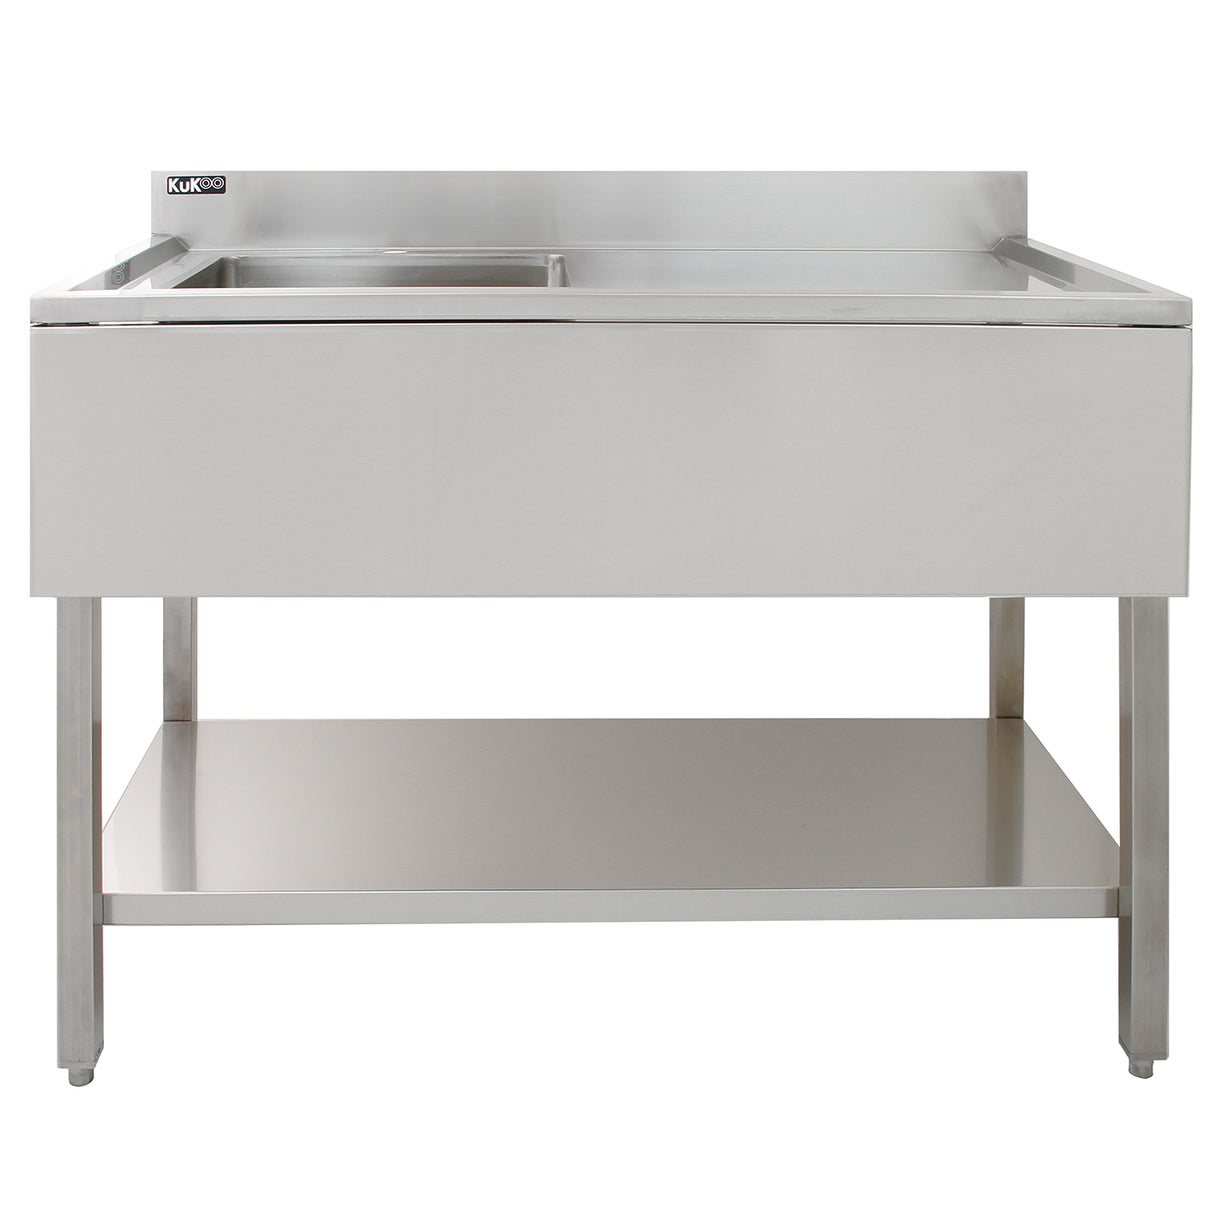 KuKoo Commercial Stainless Steel Sink - Right Hand Drainer